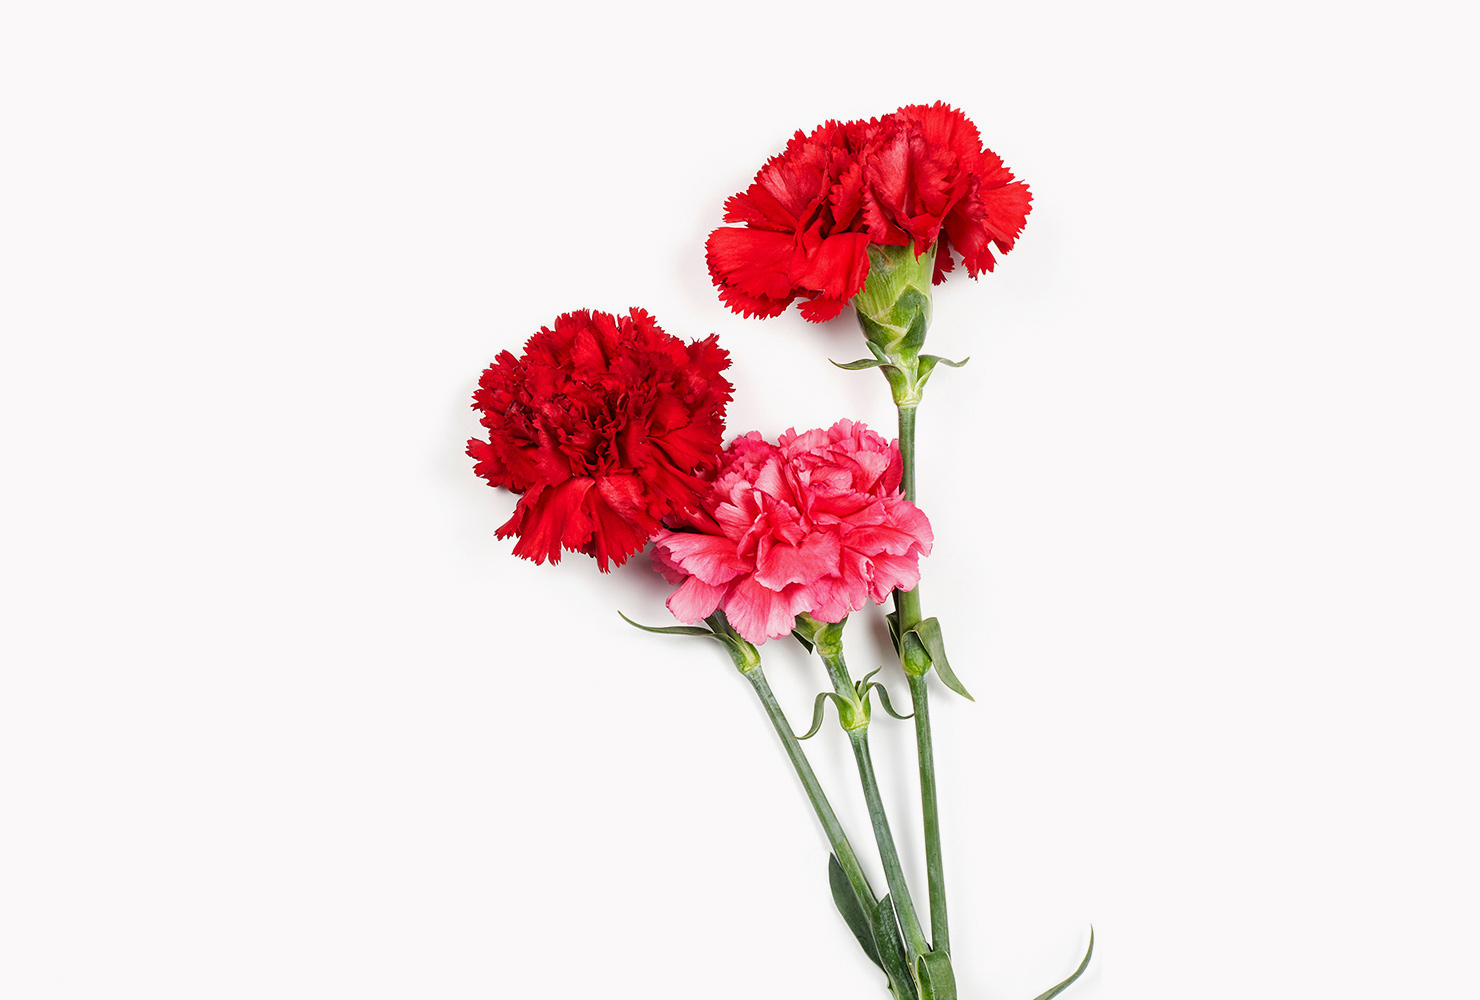 Red and pink carnations.